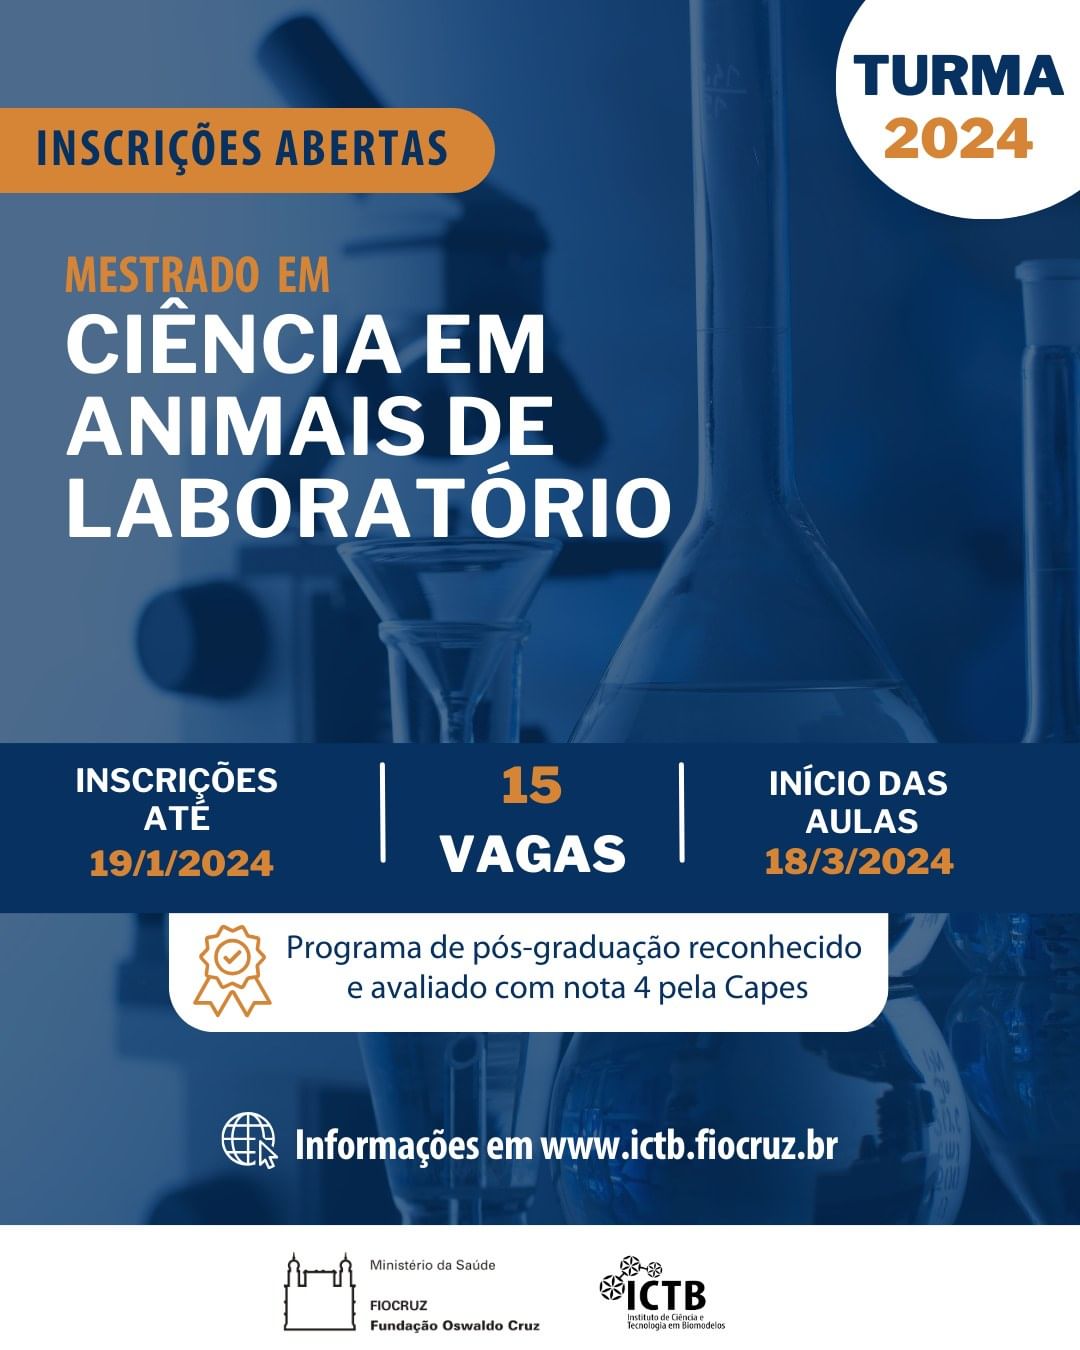 Master of Science in Laboratory Animals opens applications for 2024